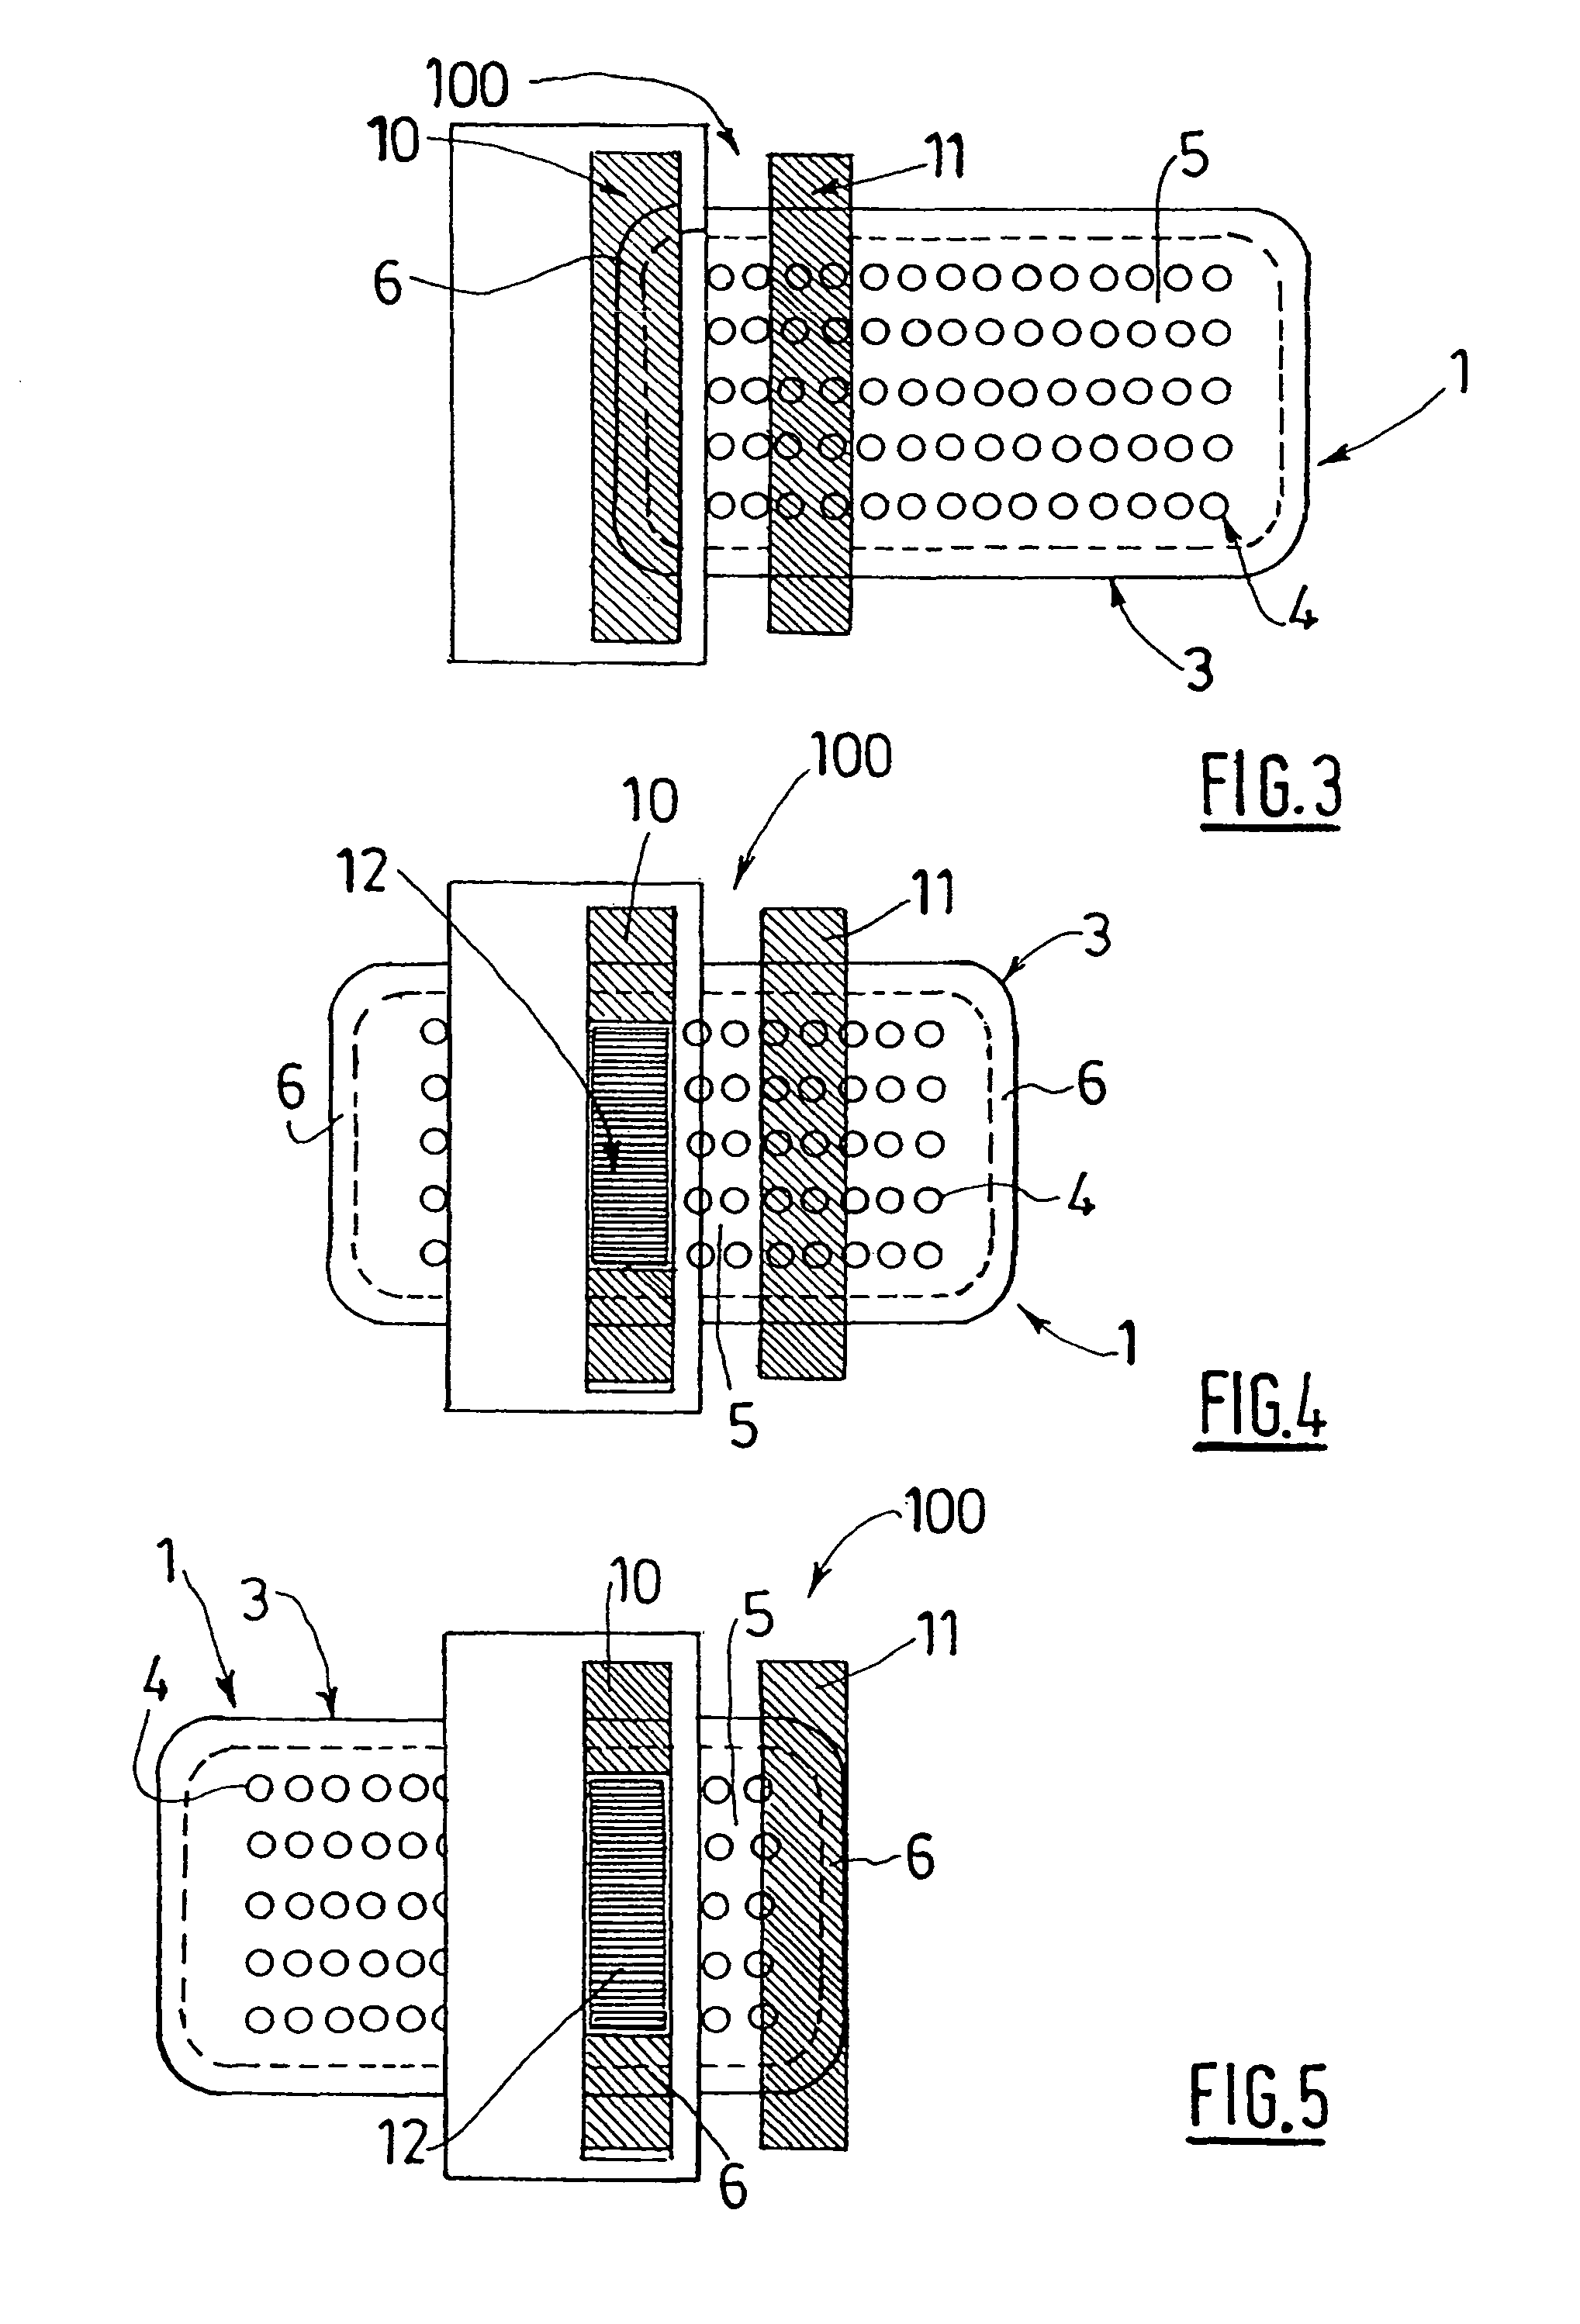 Process for decontamination by radiation of a product such as a packaging containing medical devices